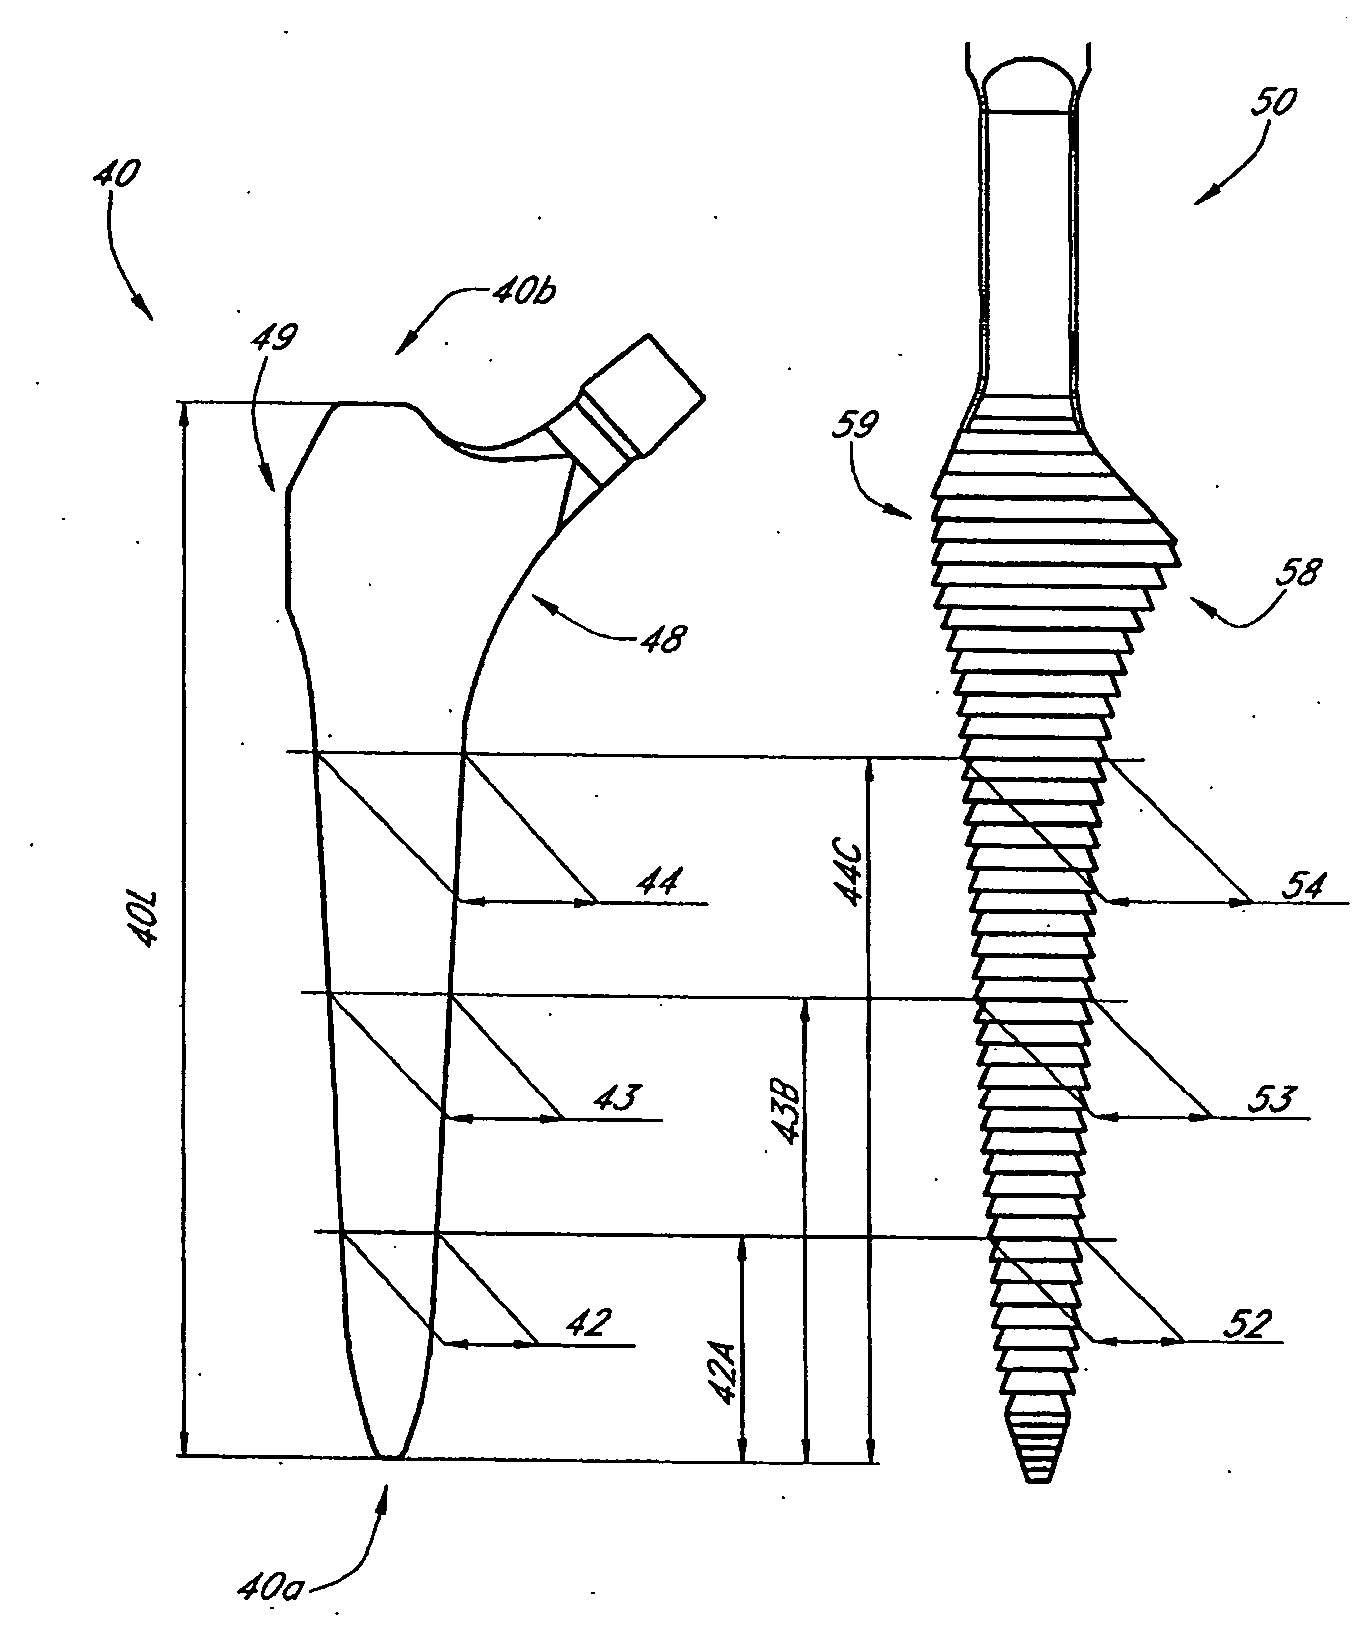 Leaflike shaft of a hip-joint prosthesis for anchoring in the femur